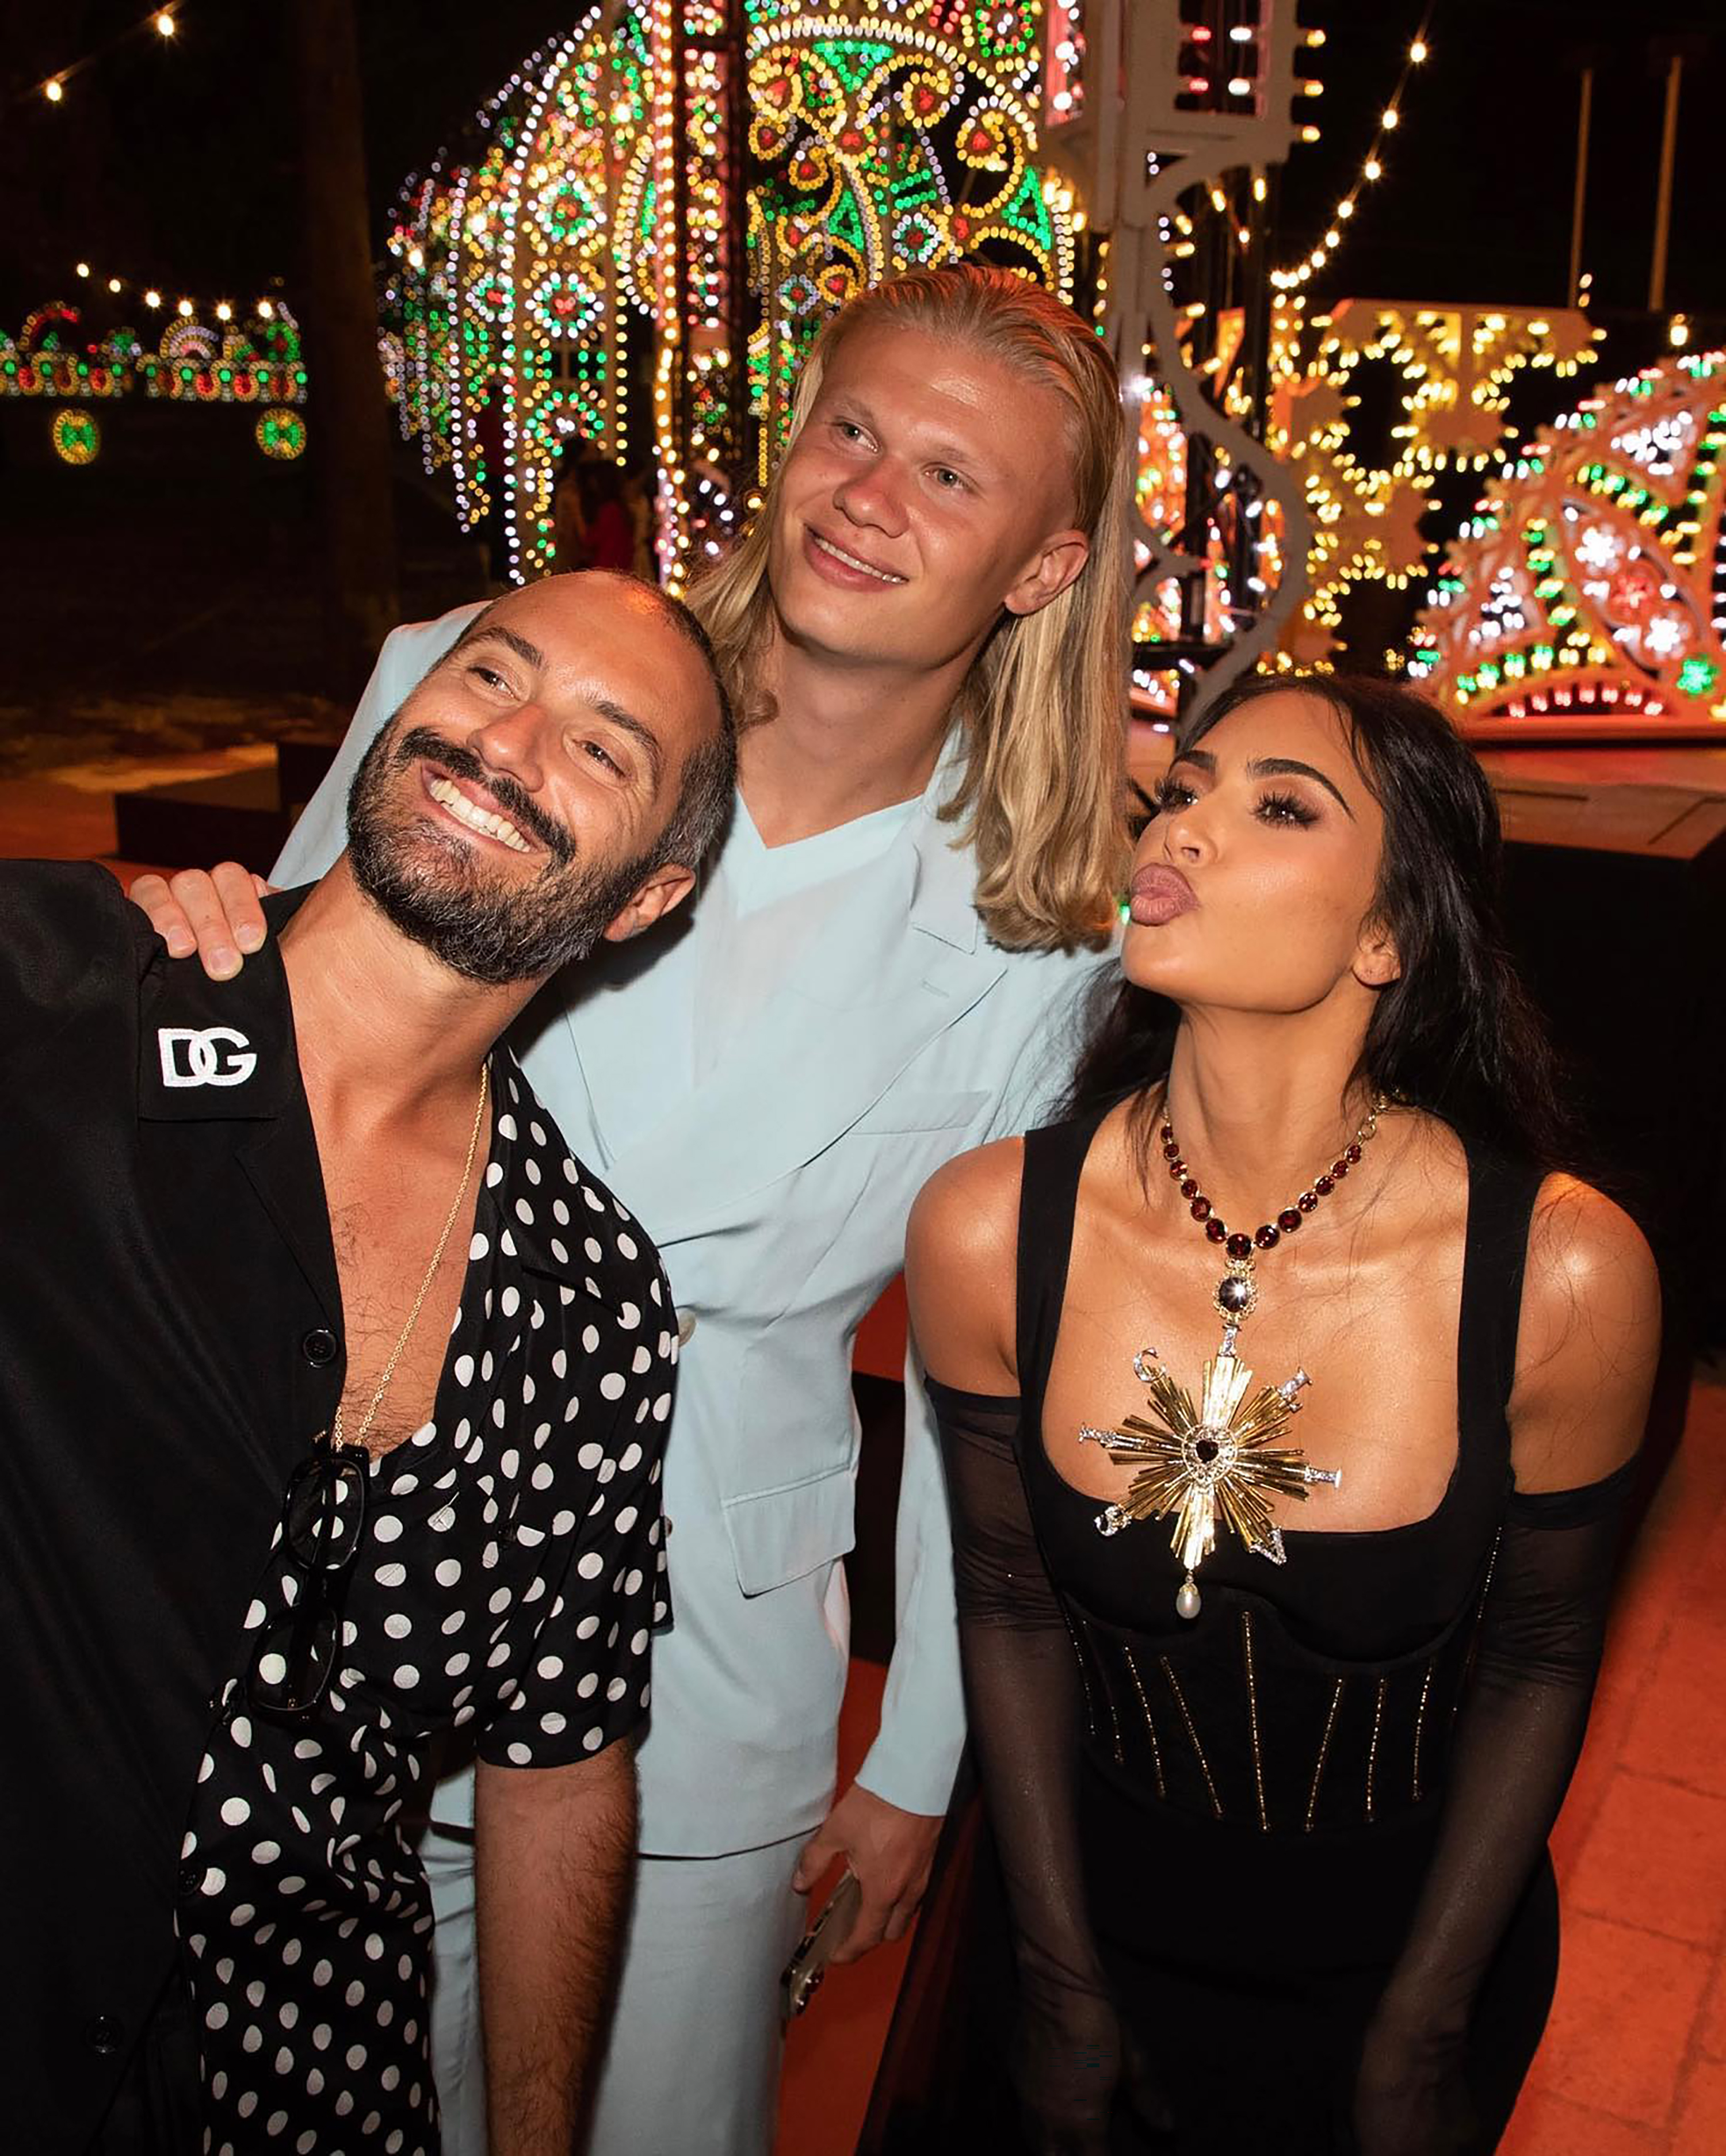 Erling Haaland posed for a snap with Kim Kardashian at a Dolce&Gabbana event